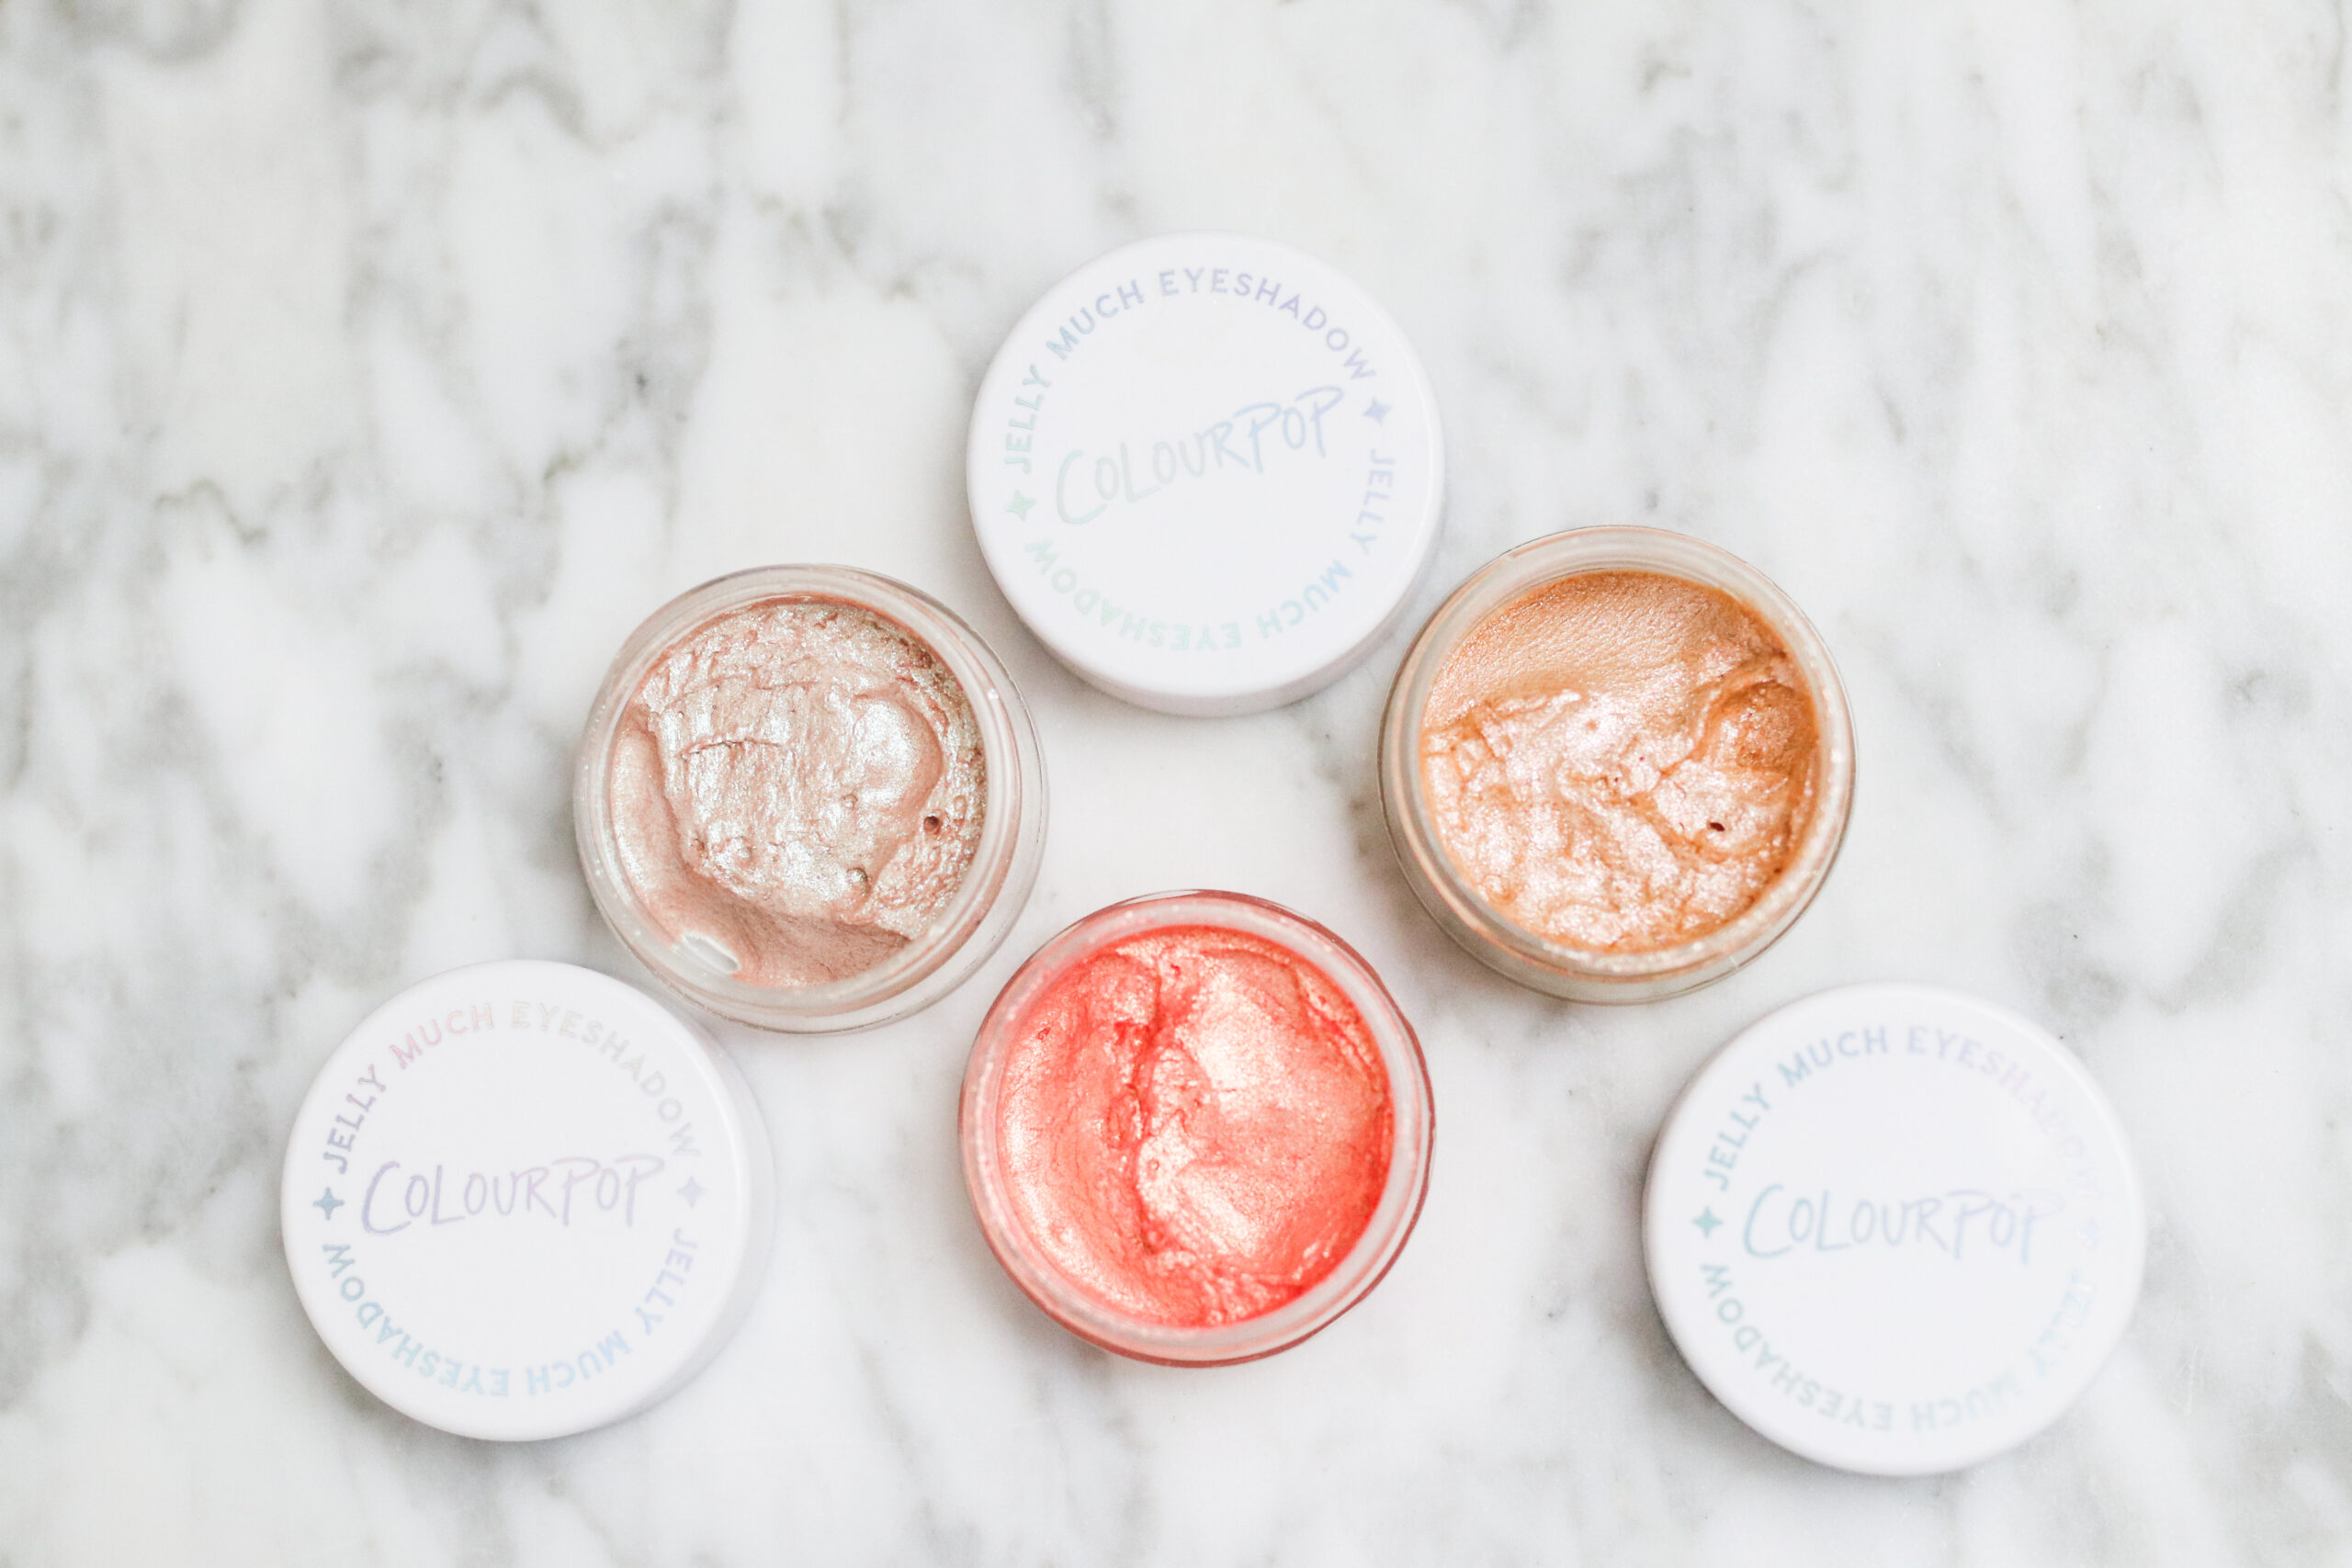 ColourPop Jelly Much Eyeshadows Review